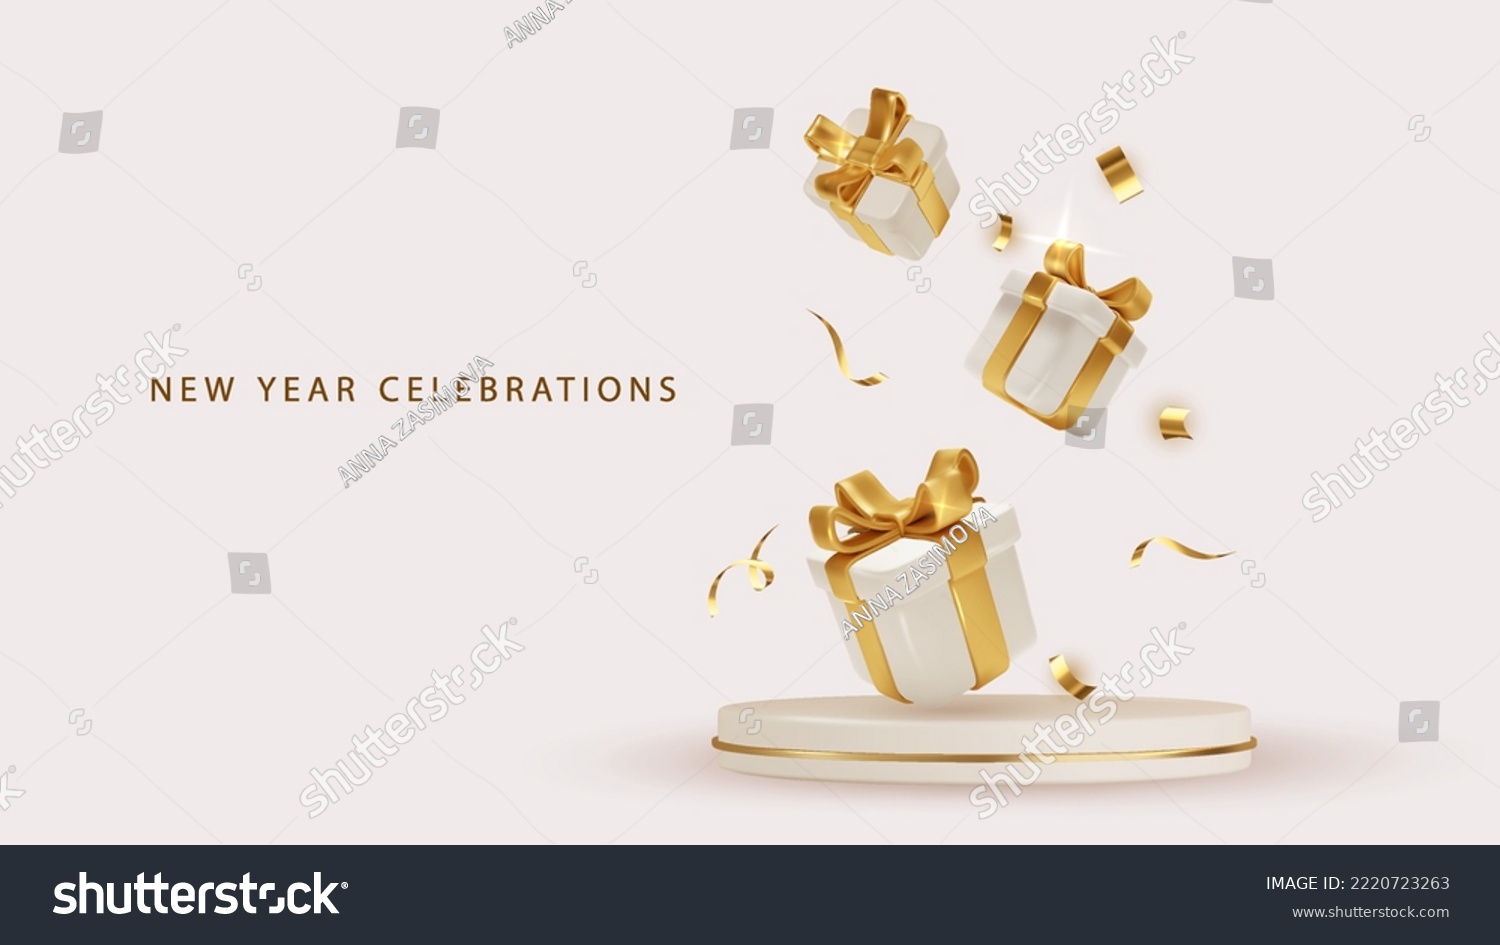 Merry Christmas Product podium scene with 3d realistic white gift boxes with golden bows and holiday decor. Realistic vector holiday concept. Festive banner design. #2220723263